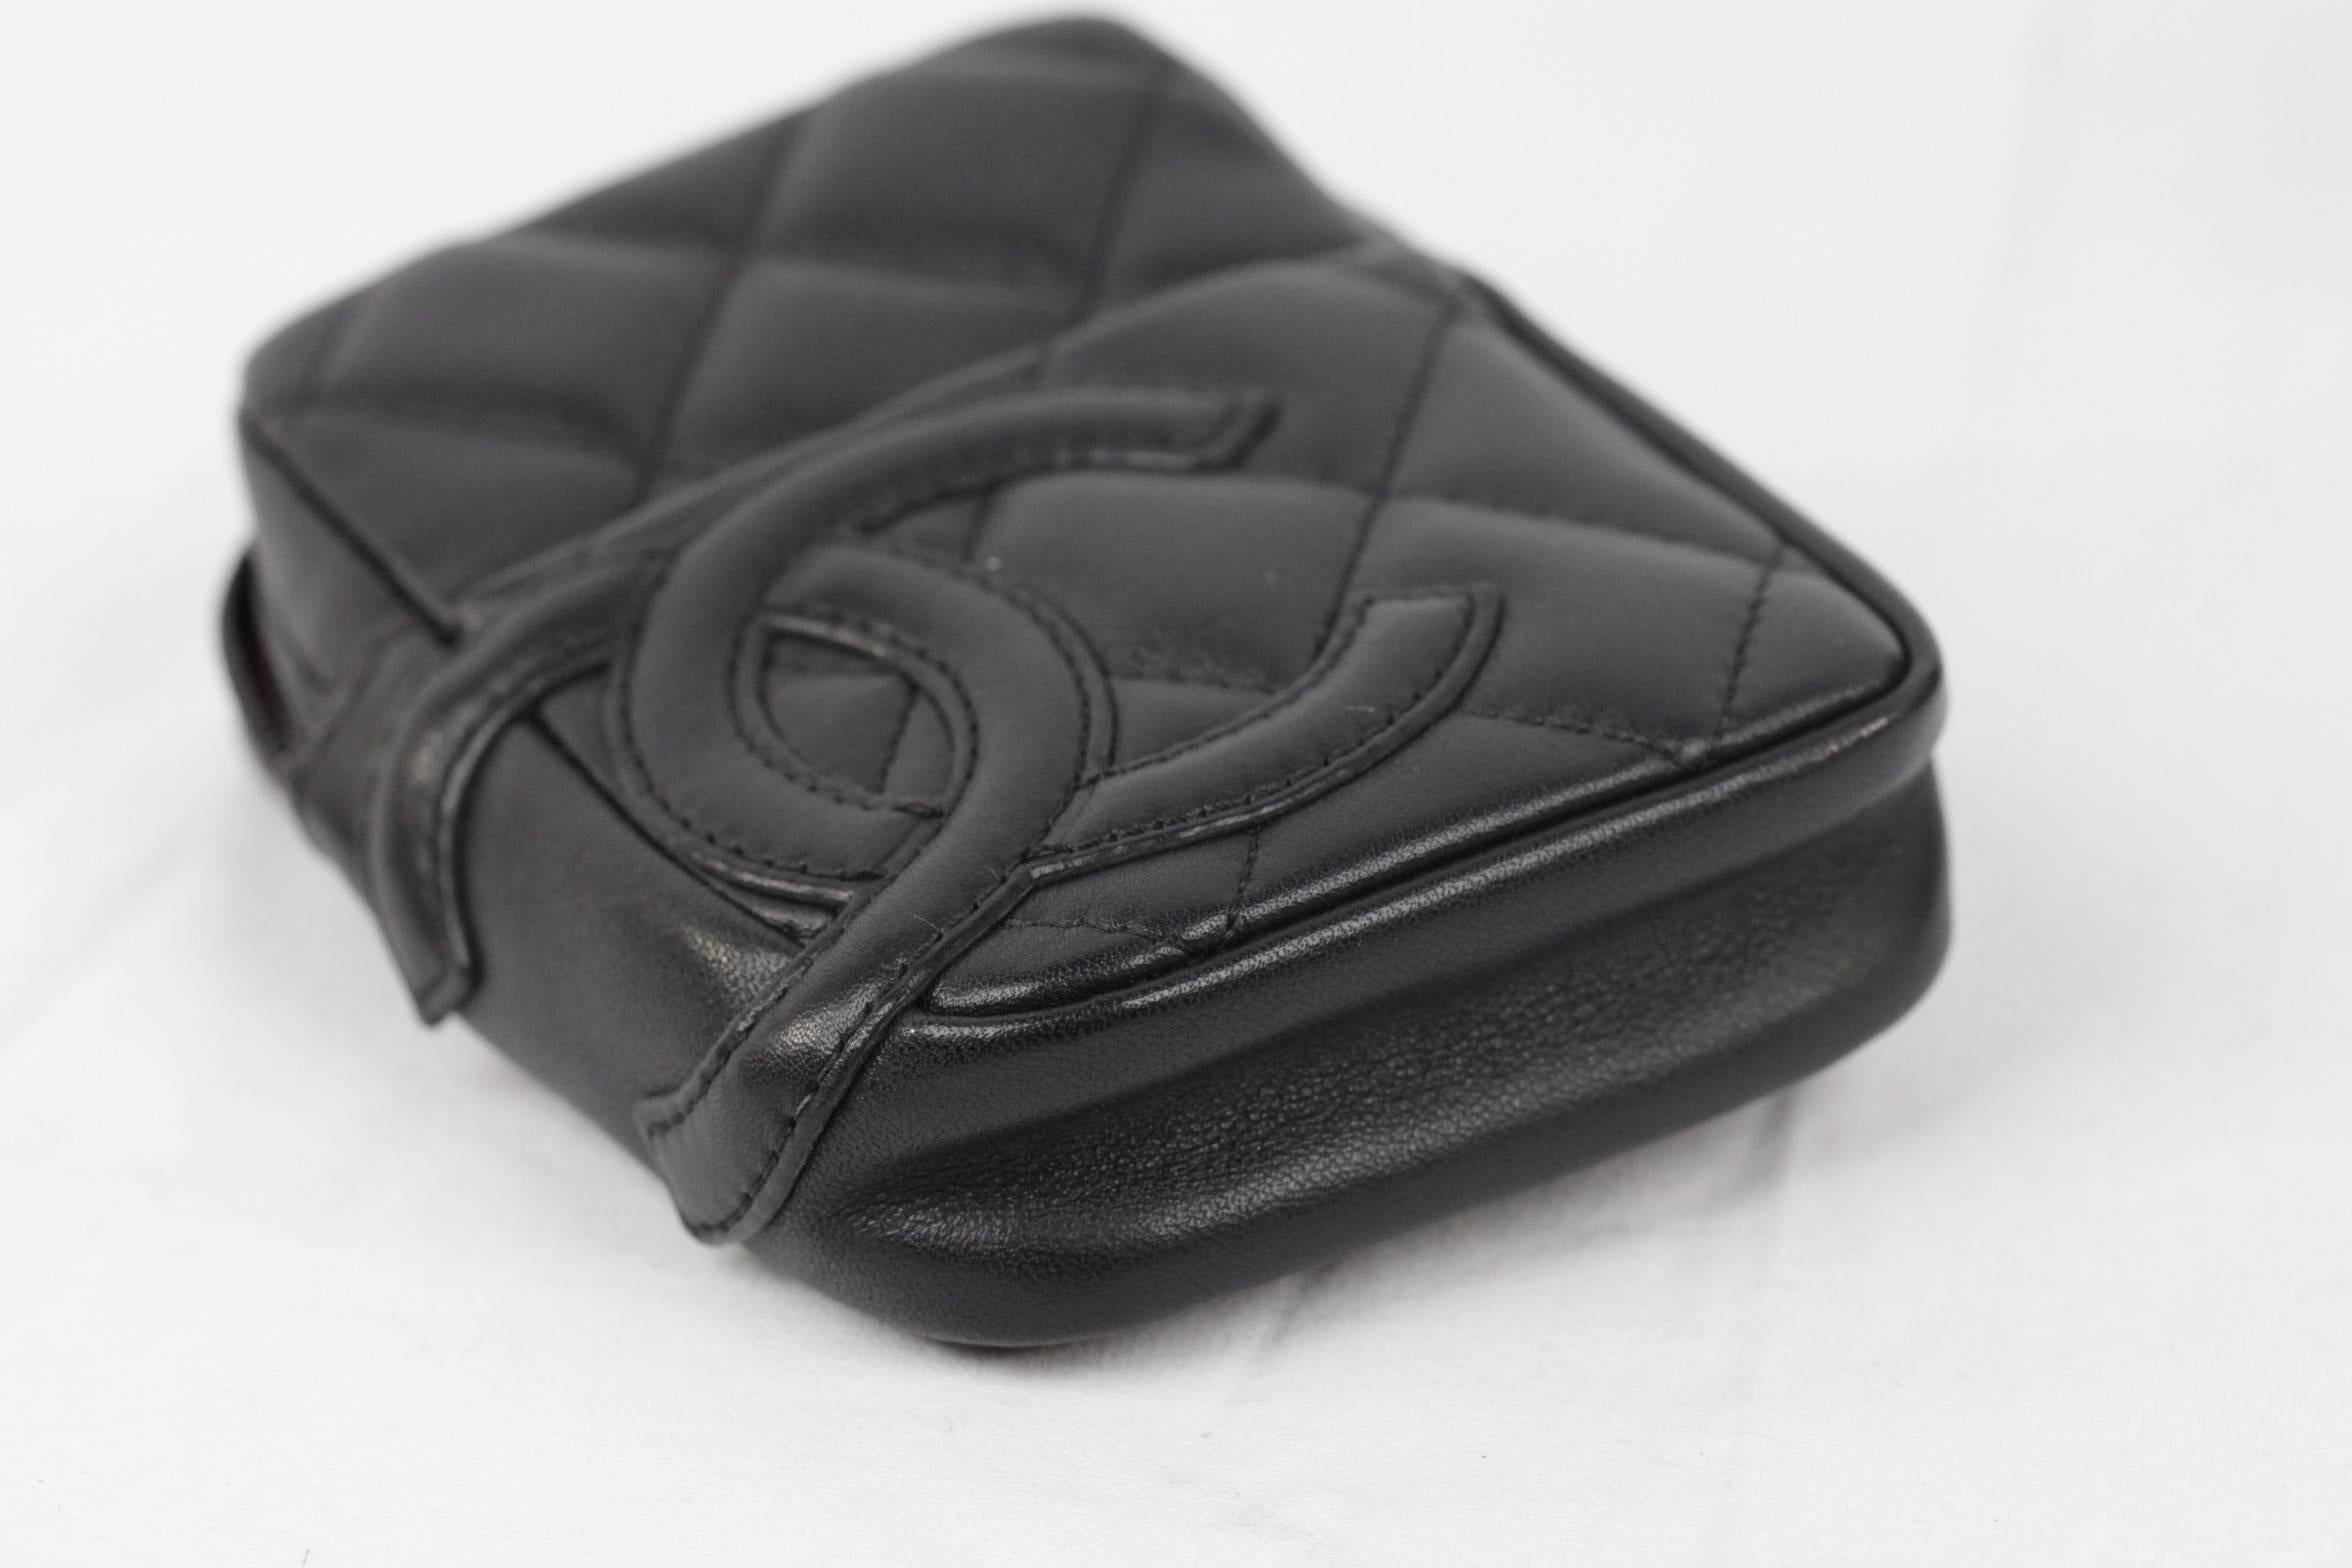  - Crafted of luxurious diamond quilted leather with a large Chanel CC leather logo patch
- The case has a front open pocket for a lighter
- Zip closure on top with Silver metal chain zipper pull
- Opens to a fuchsia fabric interior
- A leather